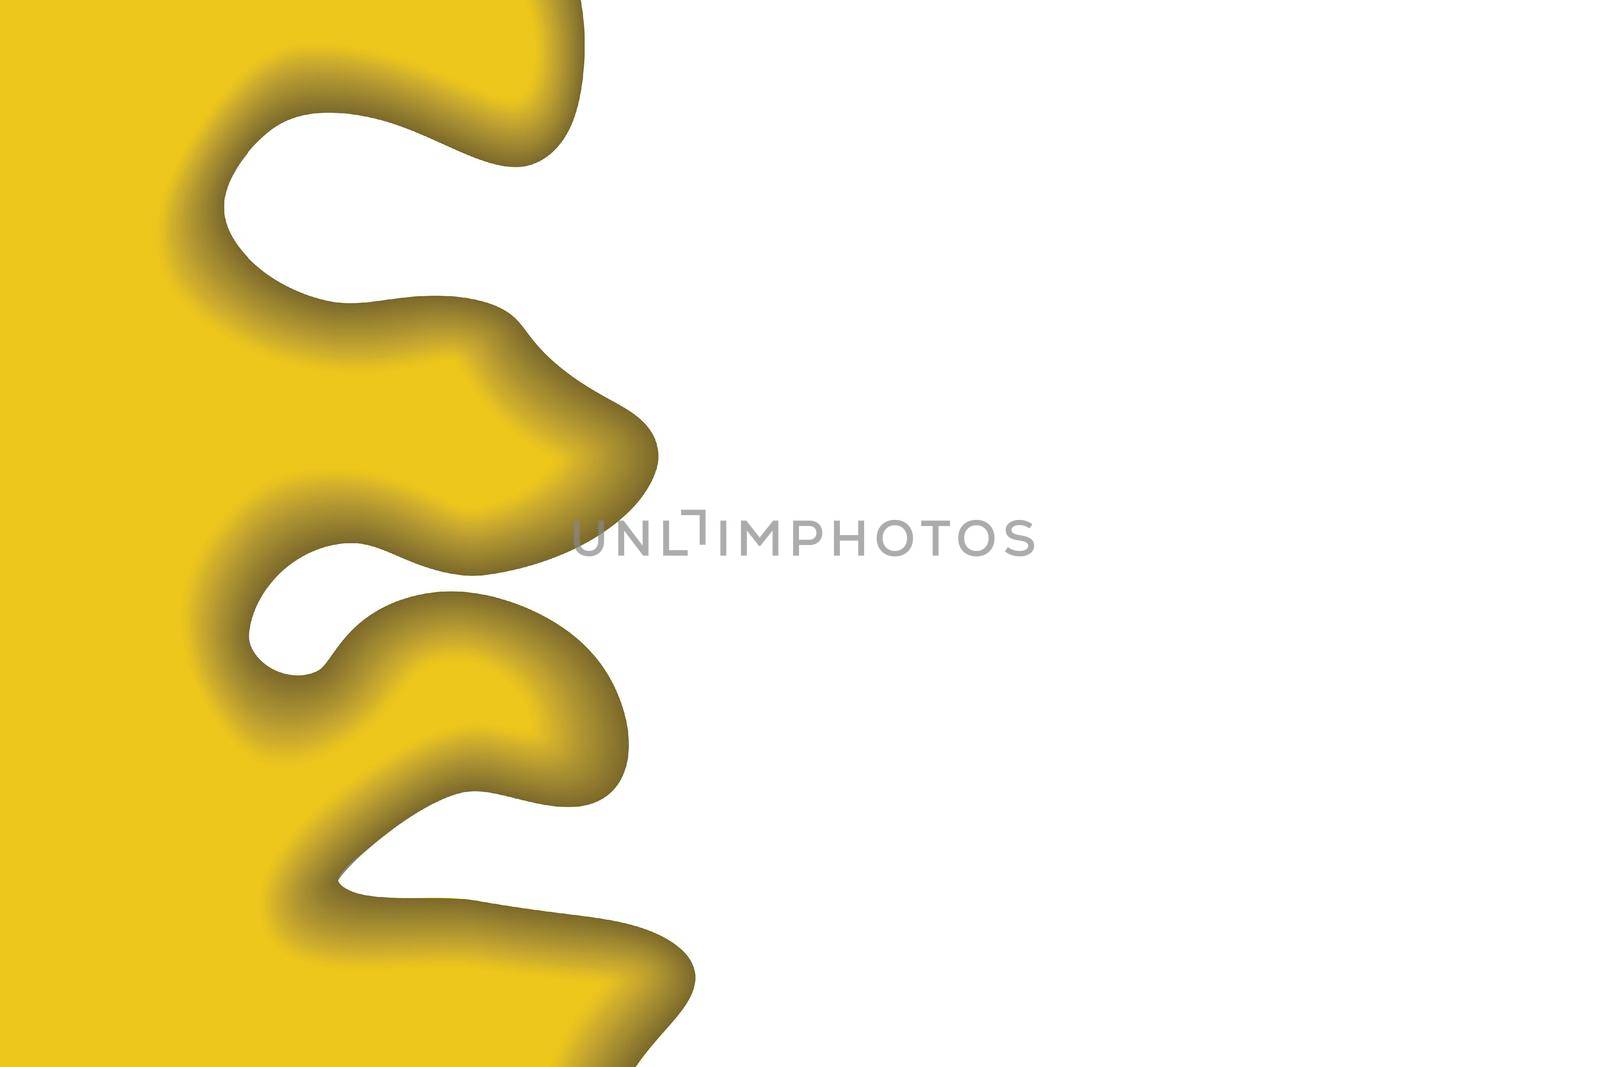 Abstract background with colorful liquid shapes. Design for poster, banner, card. White and yellow abstract illustration. 3D paper images with a subtle blend of bright colors. Copy space by allaku